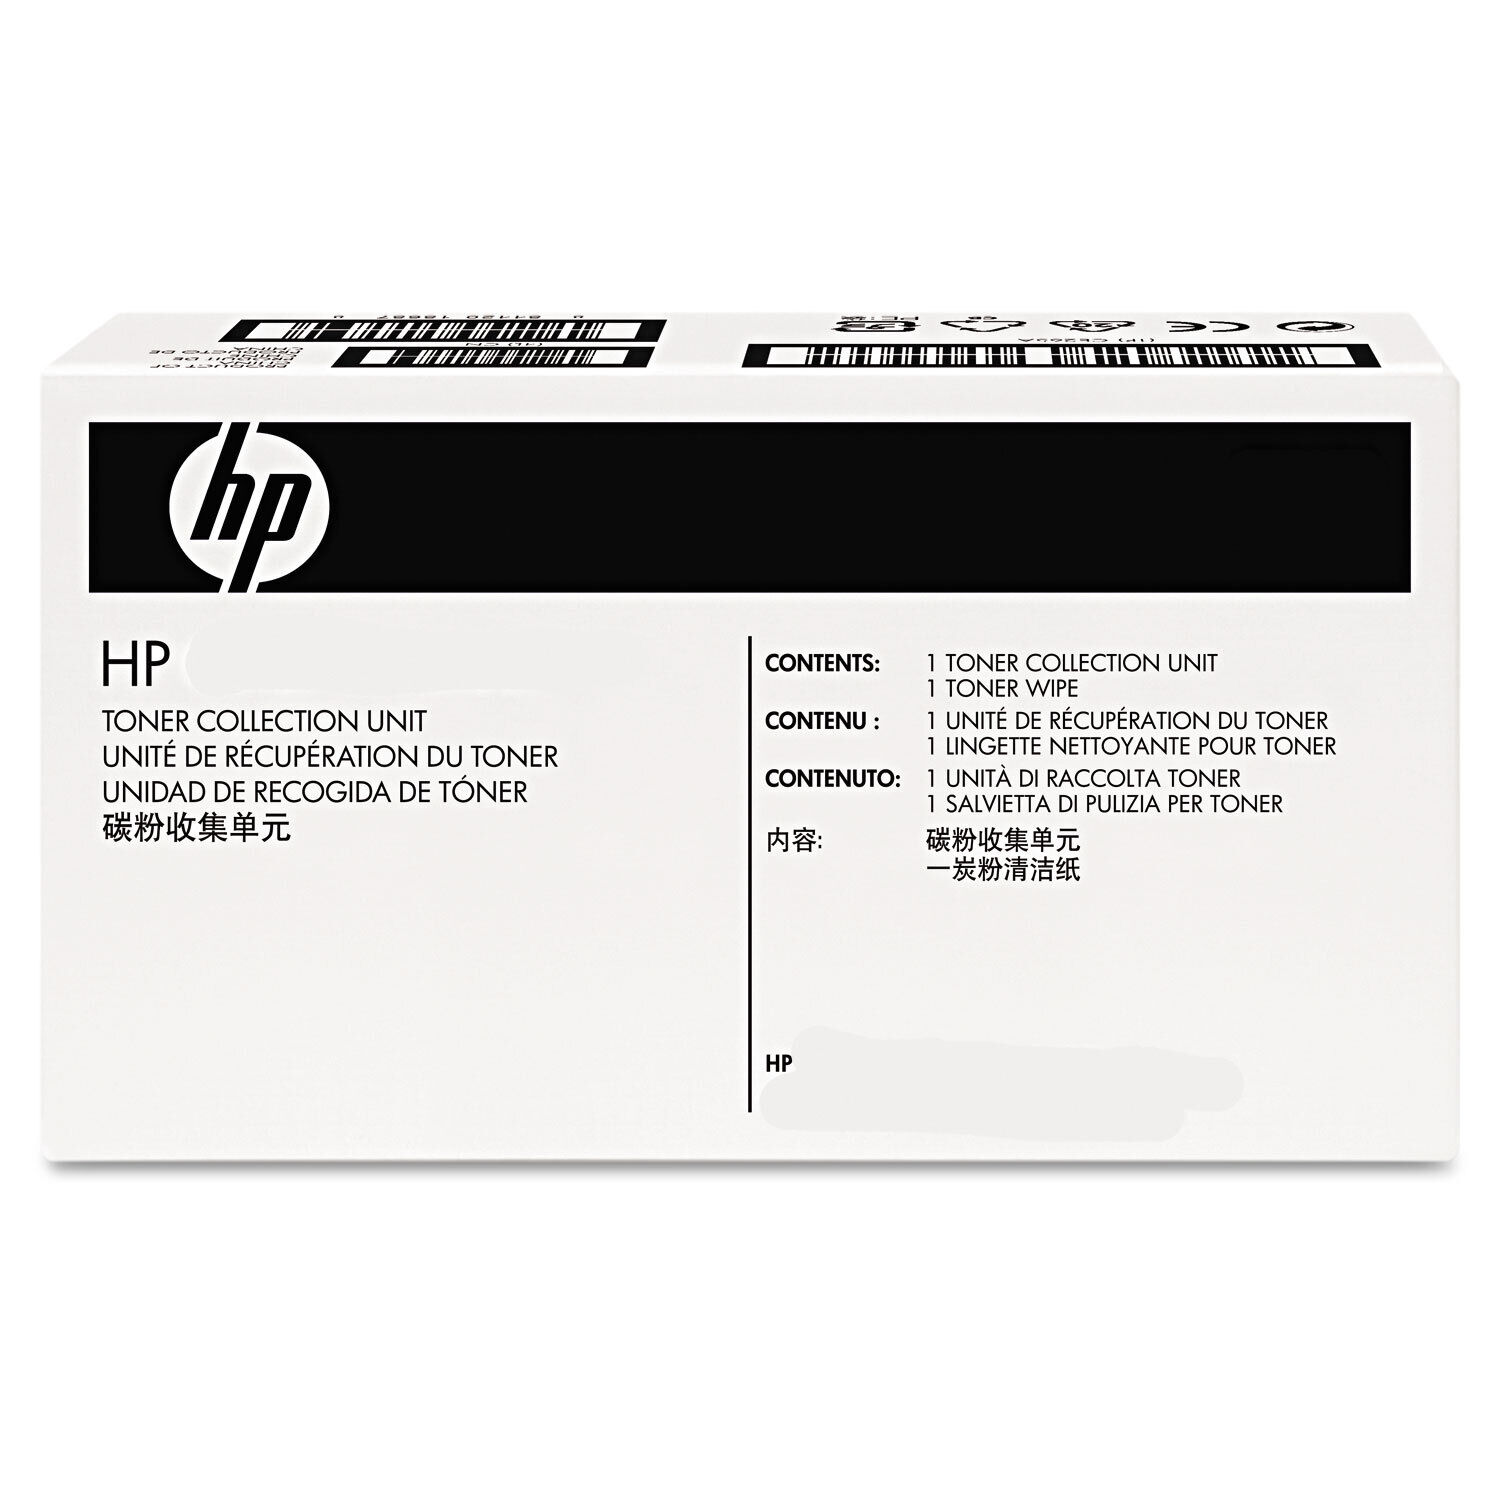 HP CE980A Toner Collection Unit 150000 Page-Yield